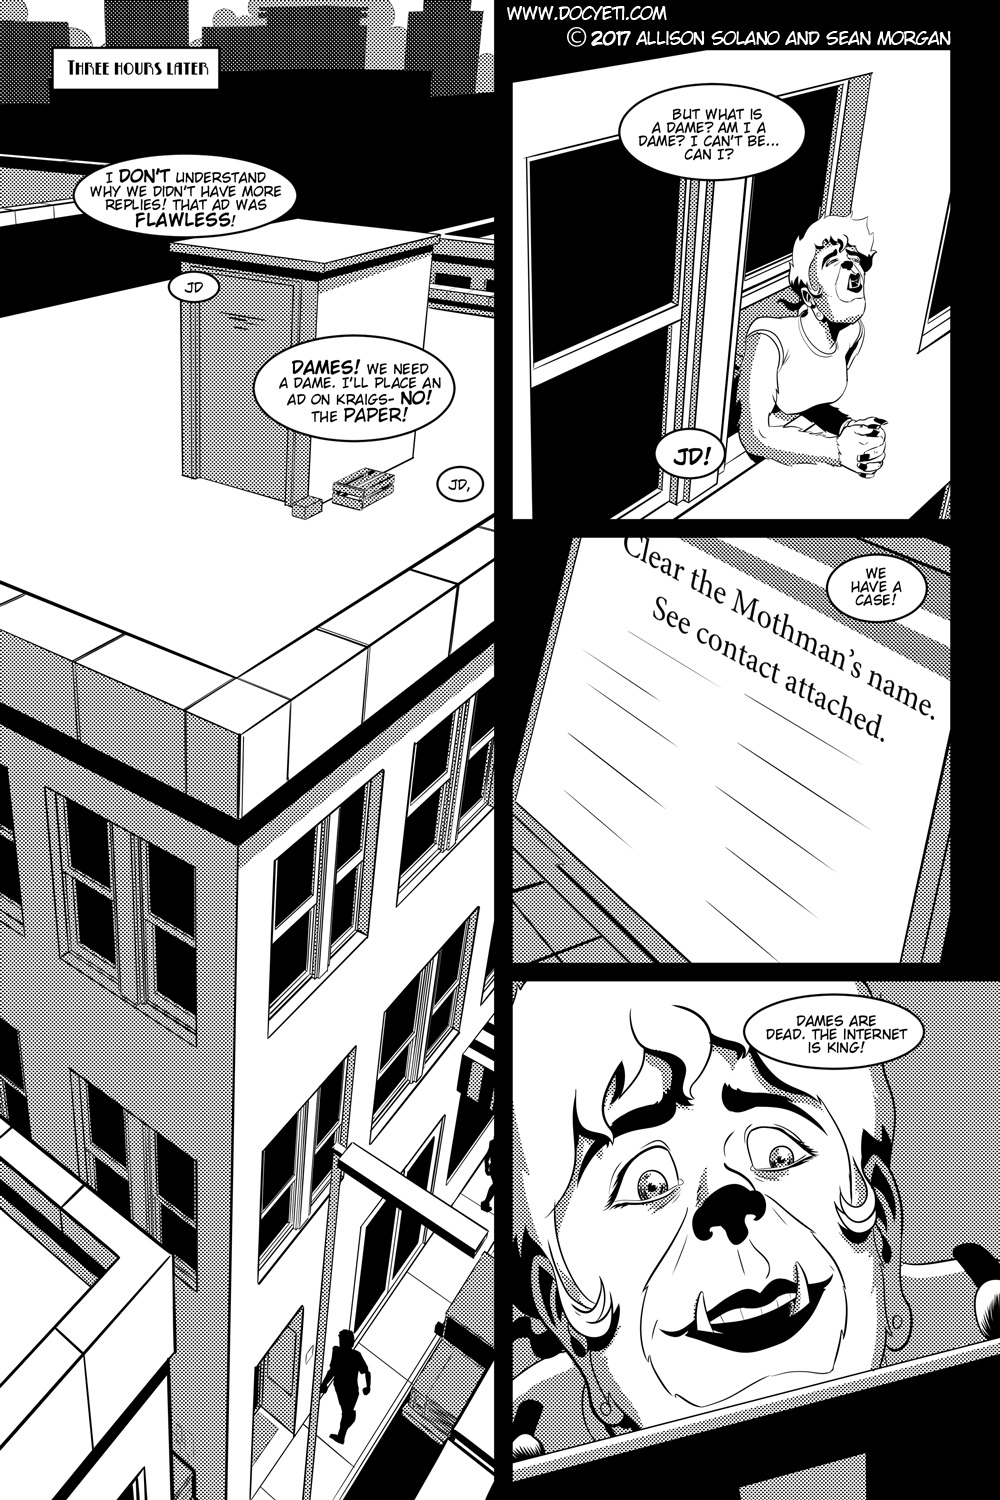 Flight of the Mothman! Issue 1 page 4